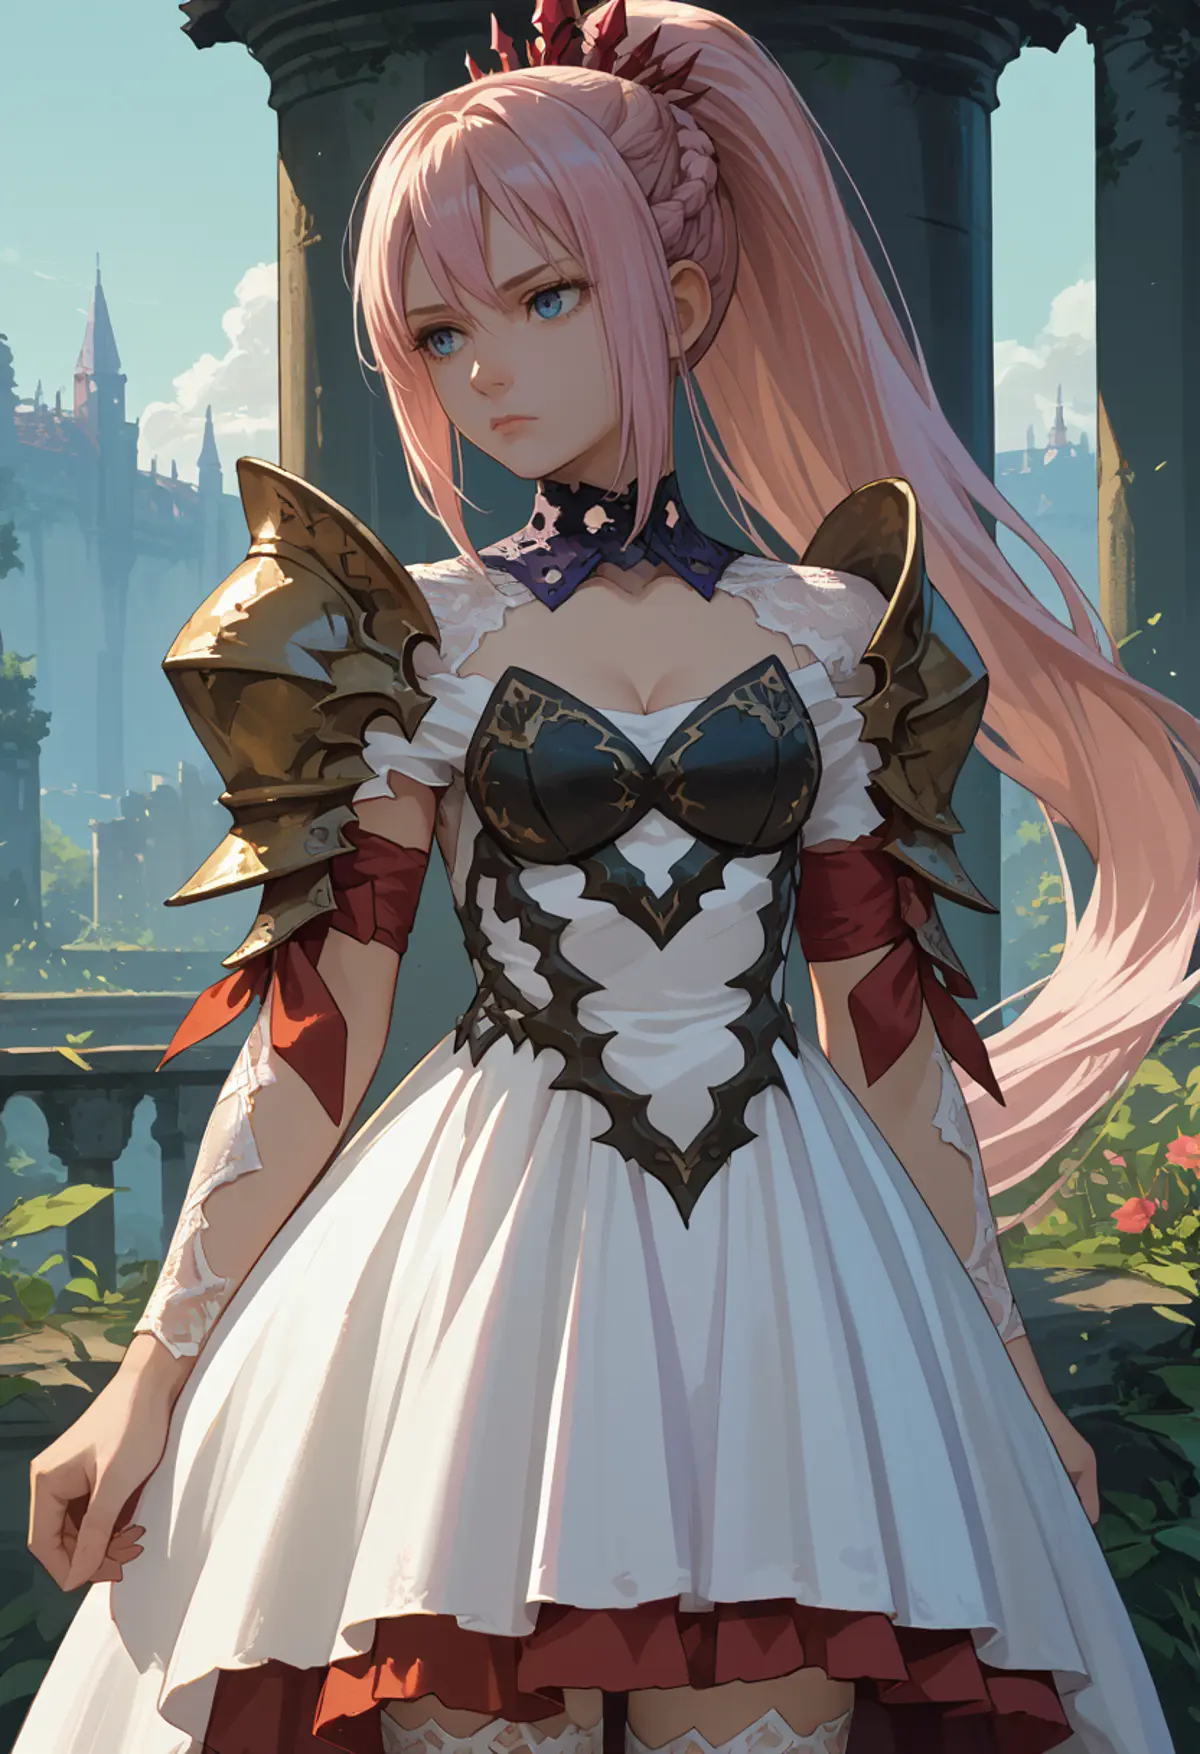 A young woman with pink hair styled in a ponytail. She is wearing a white dress with black, red, and gold accents, including armor-like details on her shoulders and chest. The dress has a high collar and a cutout on the chest. She is standing in a fantasy setting, with a backdrop of a castle and a cloudy sky. 